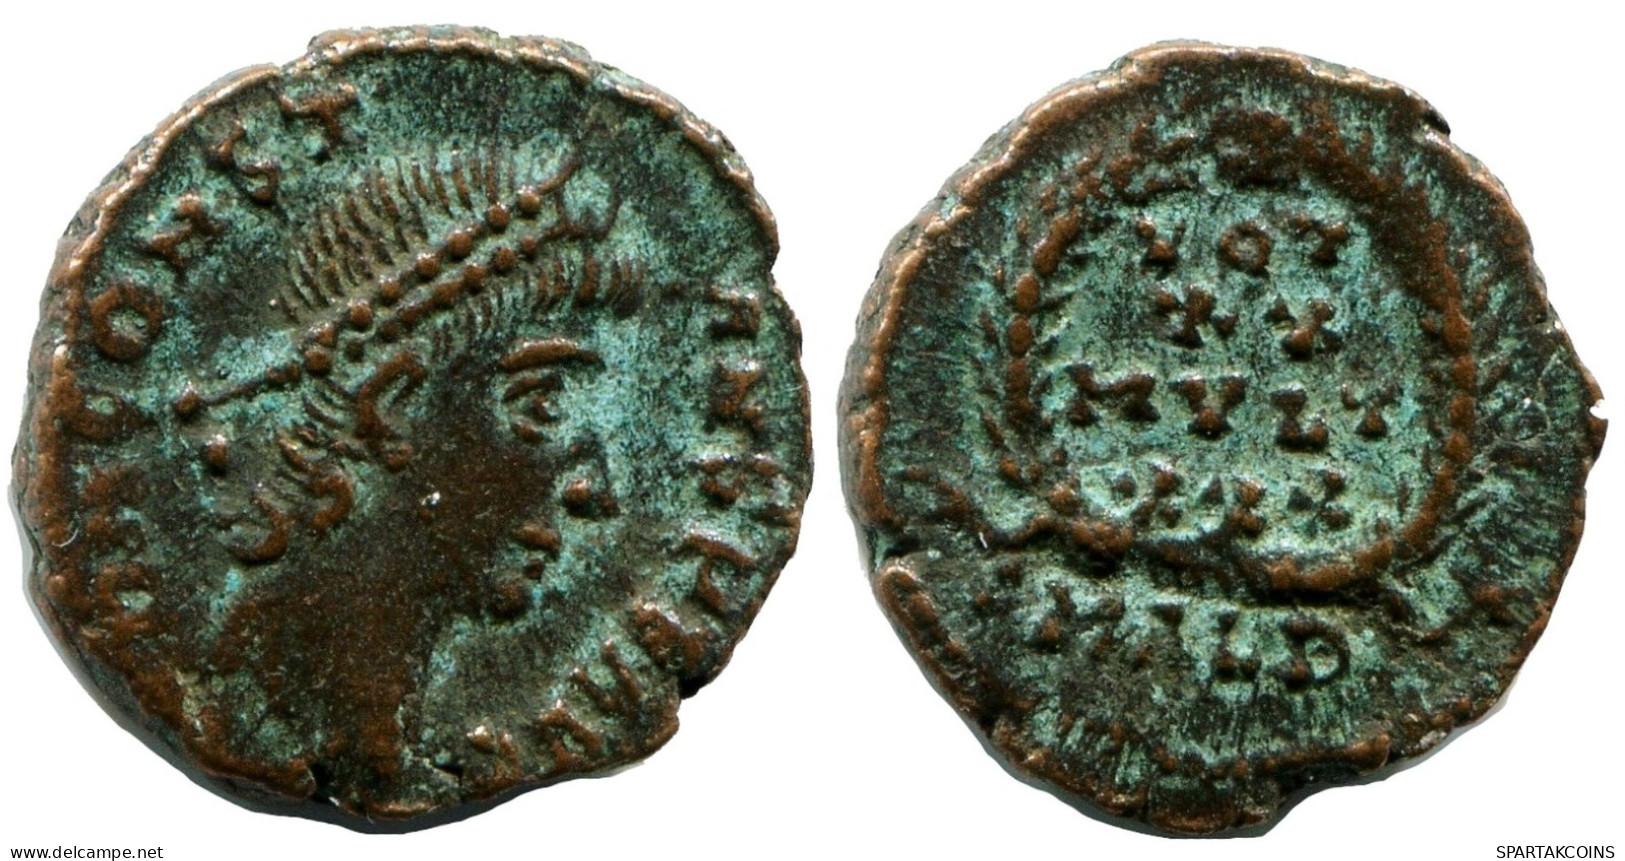 CONSTANS MINTED IN ALEKSANDRIA FOUND IN IHNASYAH HOARD EGYPT #ANC11374.14.F.A - The Christian Empire (307 AD To 363 AD)